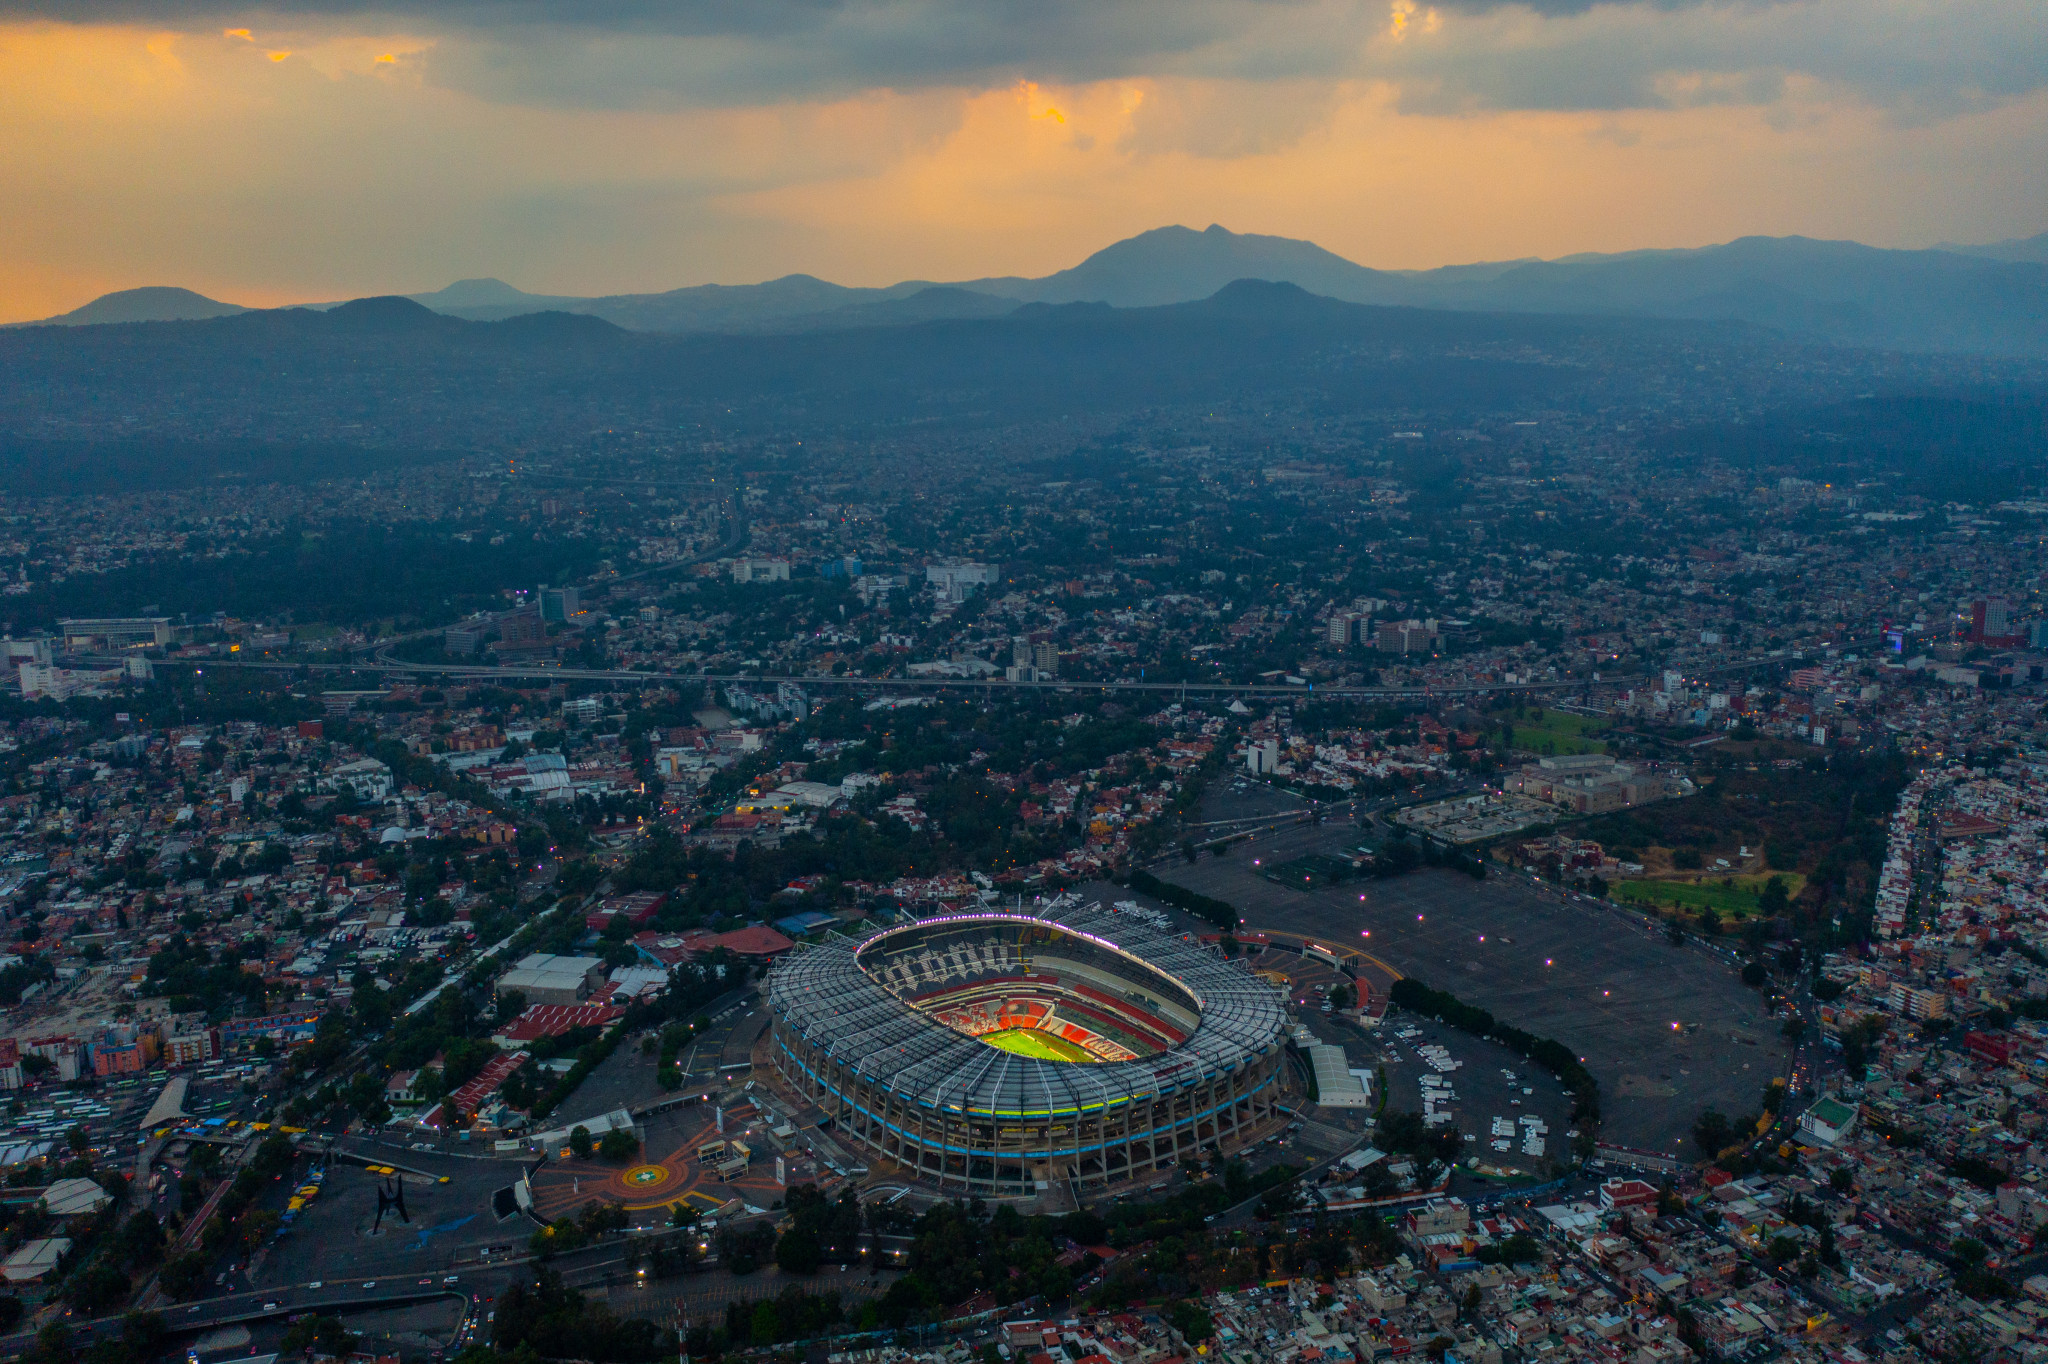 Mexico is exploring a bid for the 2036 Olympics, with Mexico City a likely frontrunner to be the proposed host city ©Getty Images